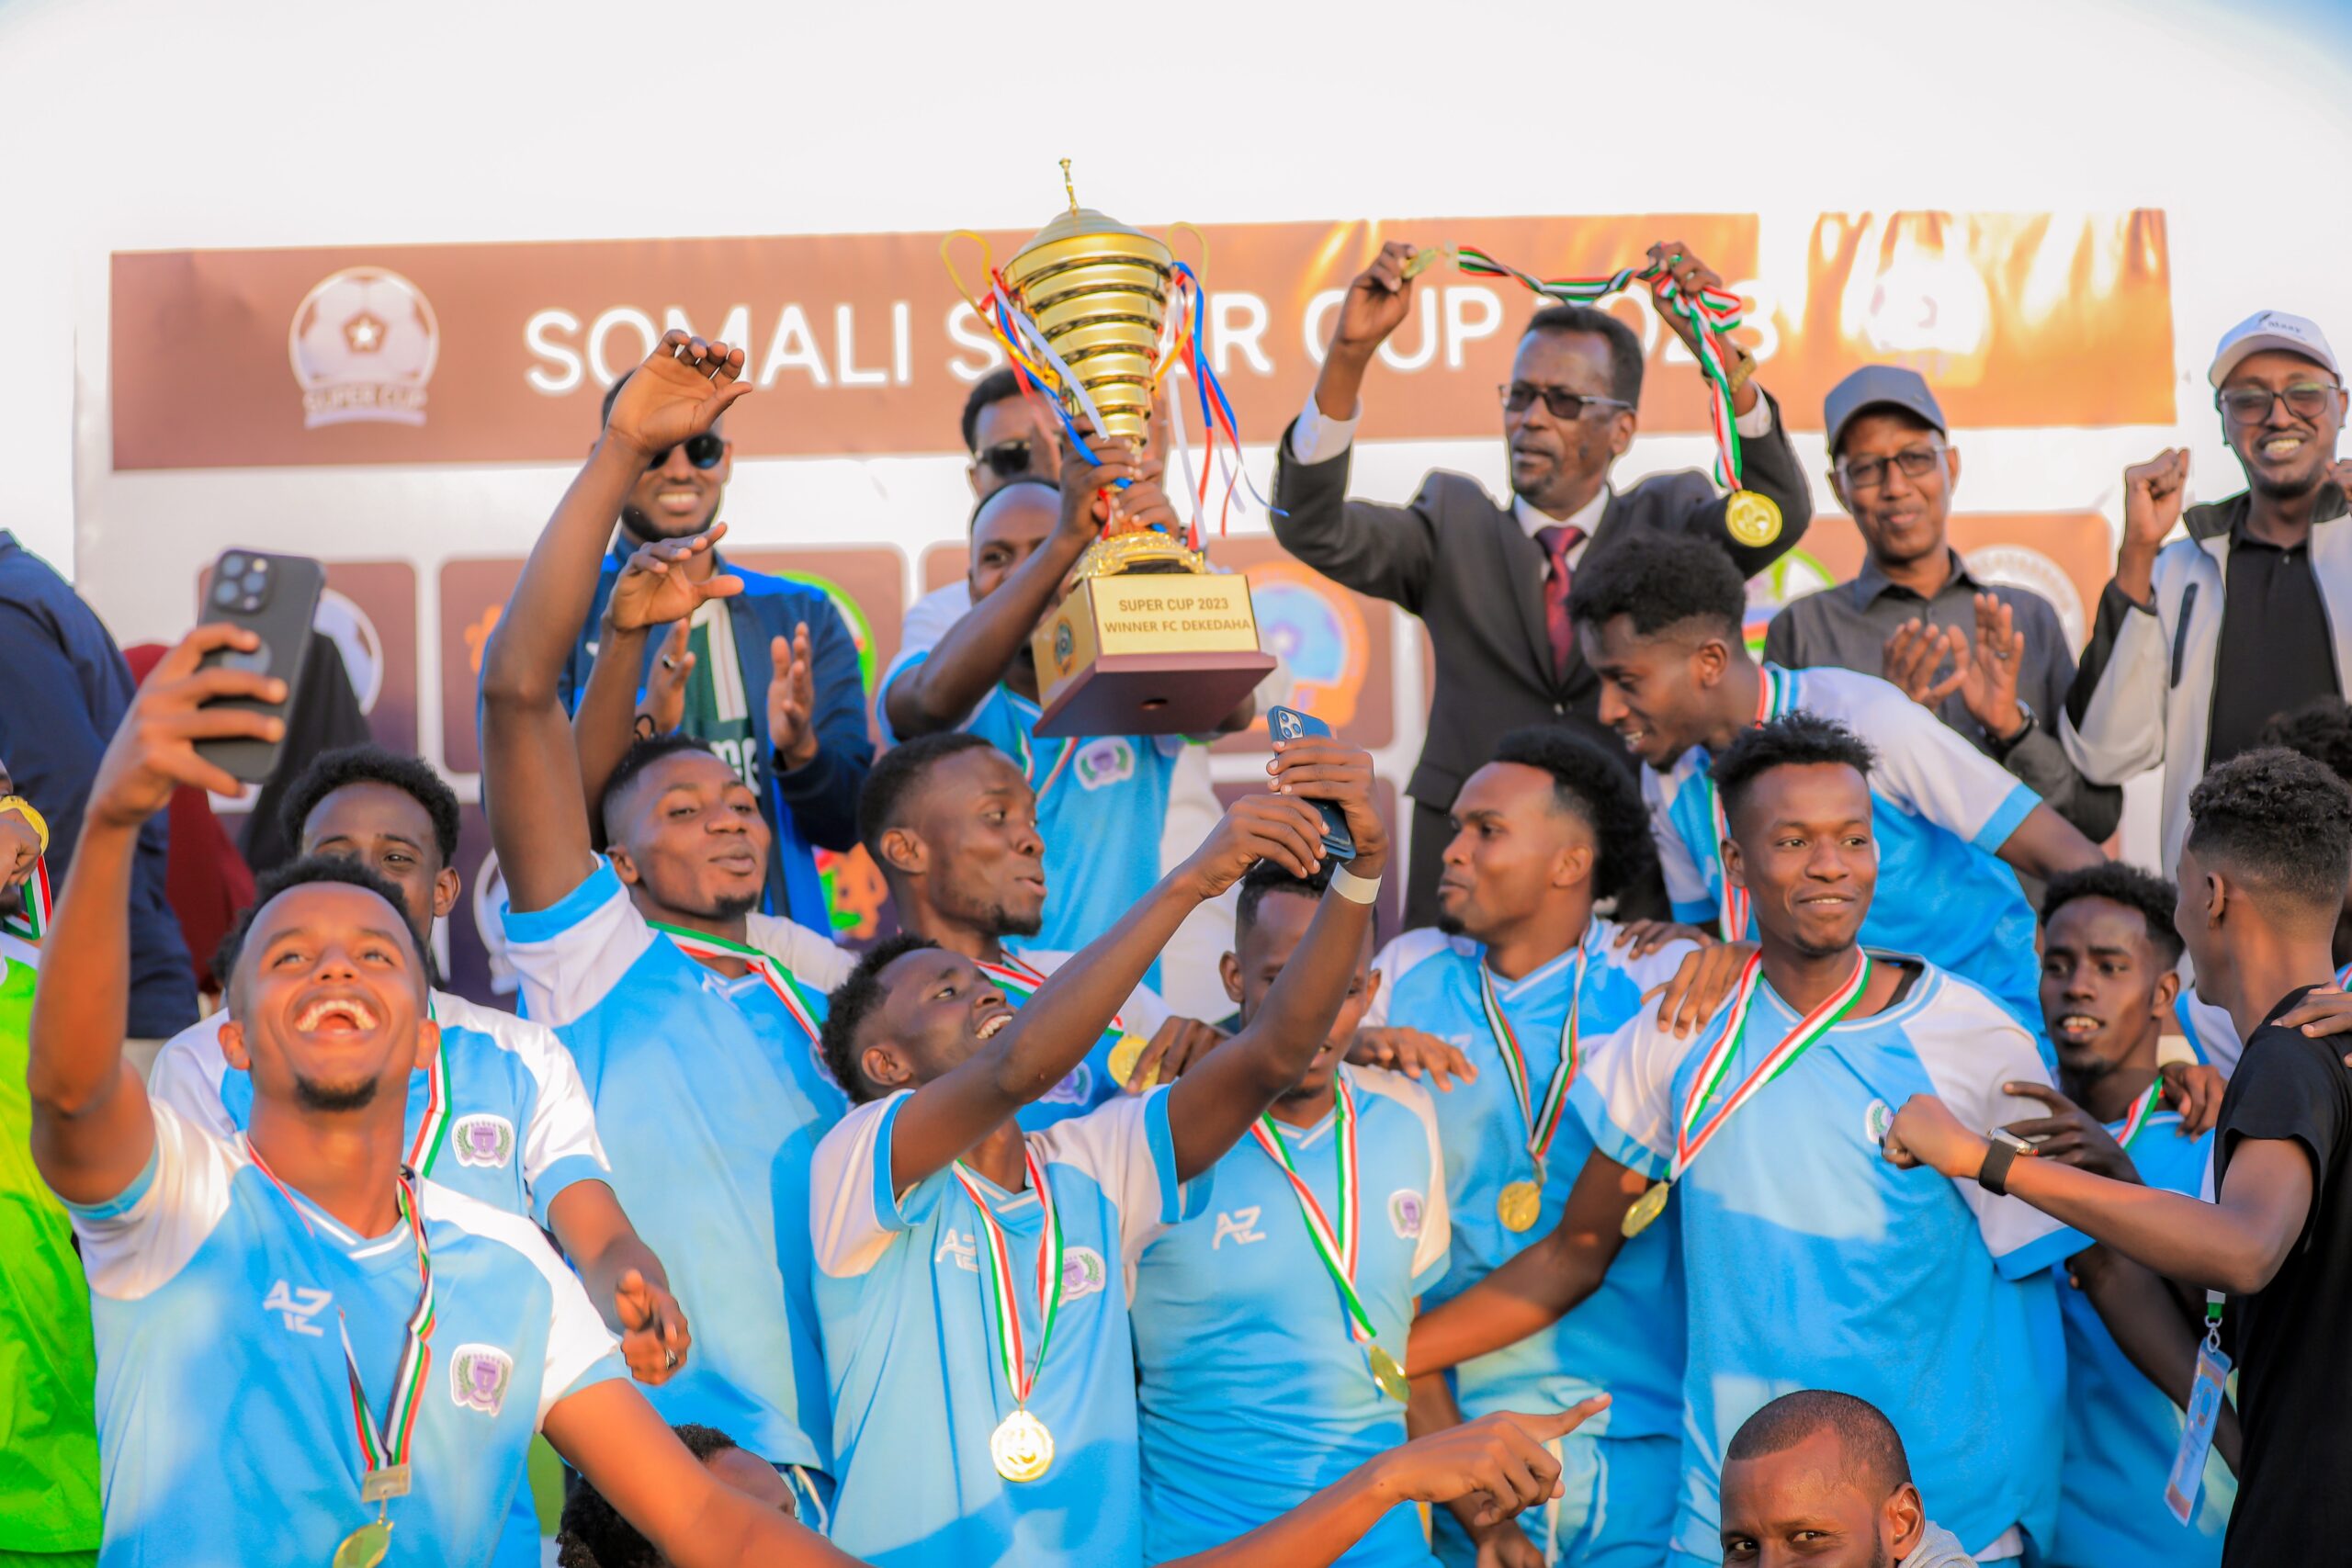 Somalia’s Super Cup played outside Mogadishu for the first time in history.